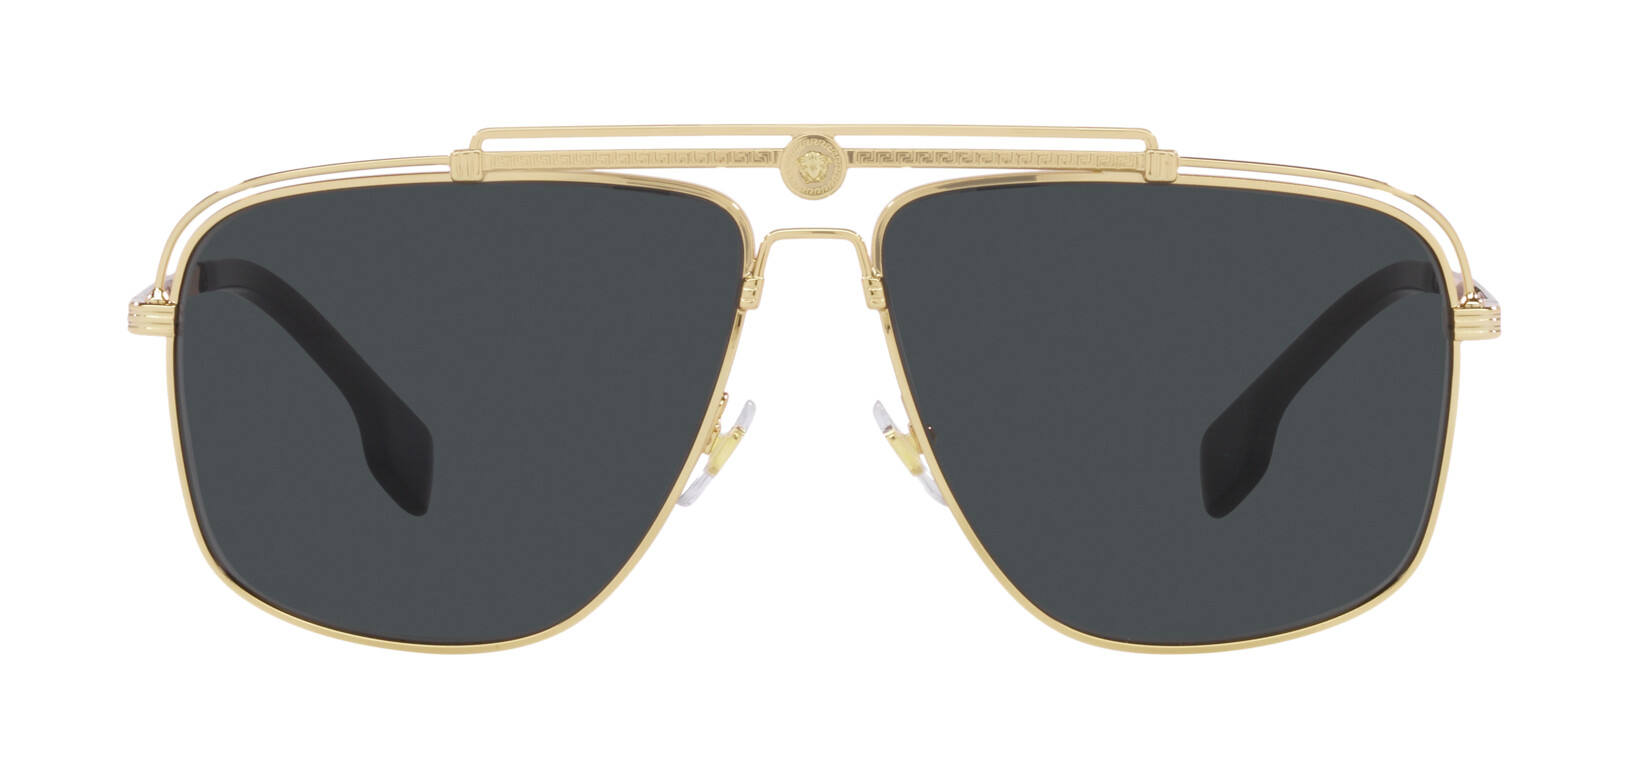 [products.image.front] Versace 0VE2242 100287 Sonnenbrille